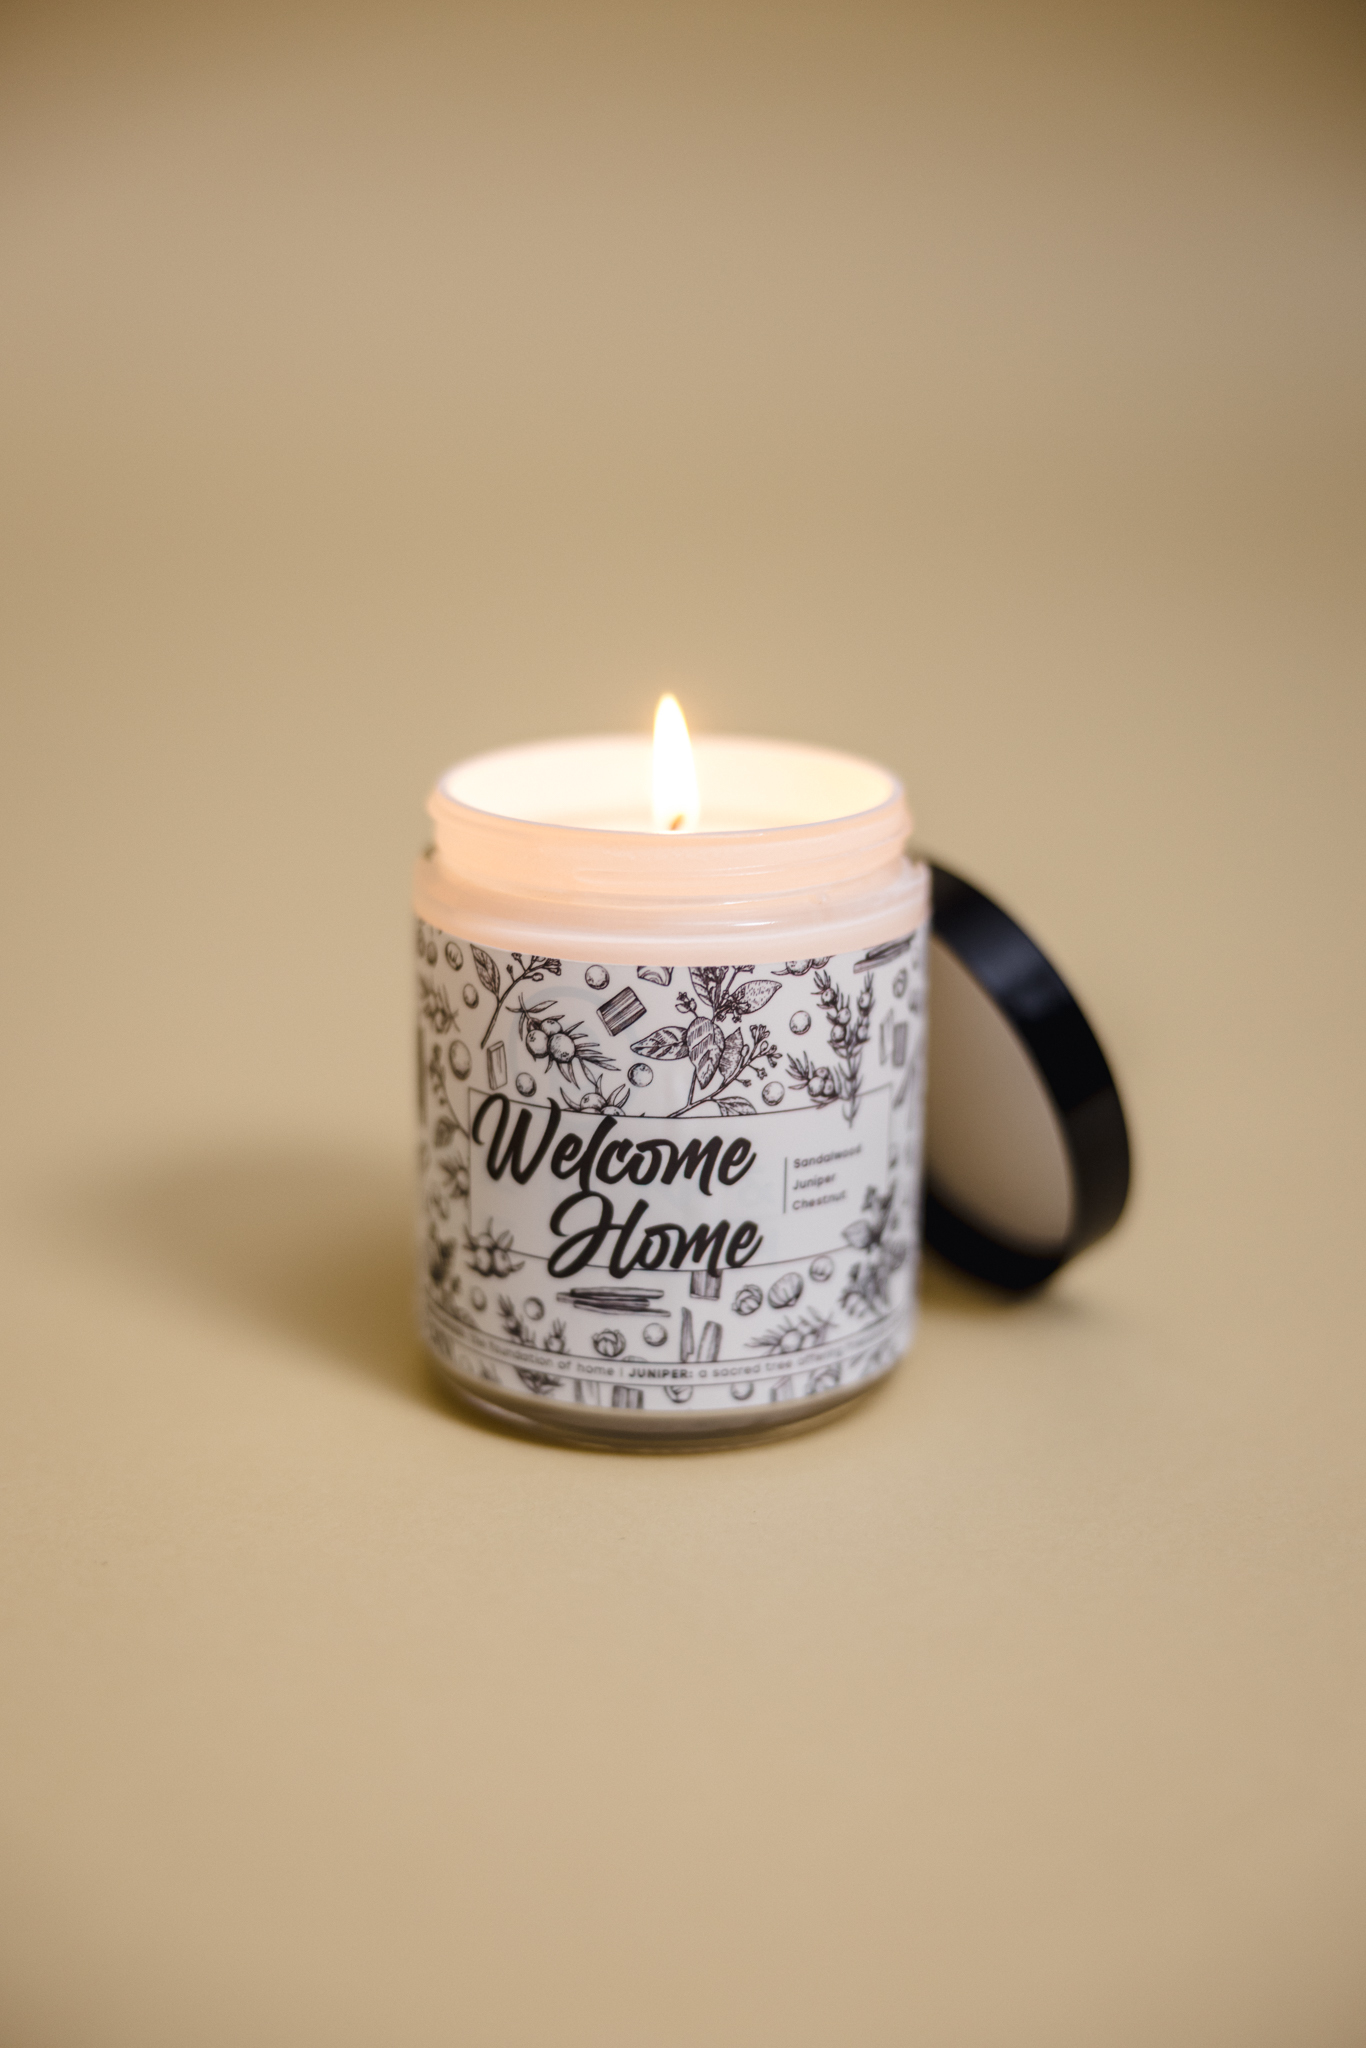 The Welcome Home Candle